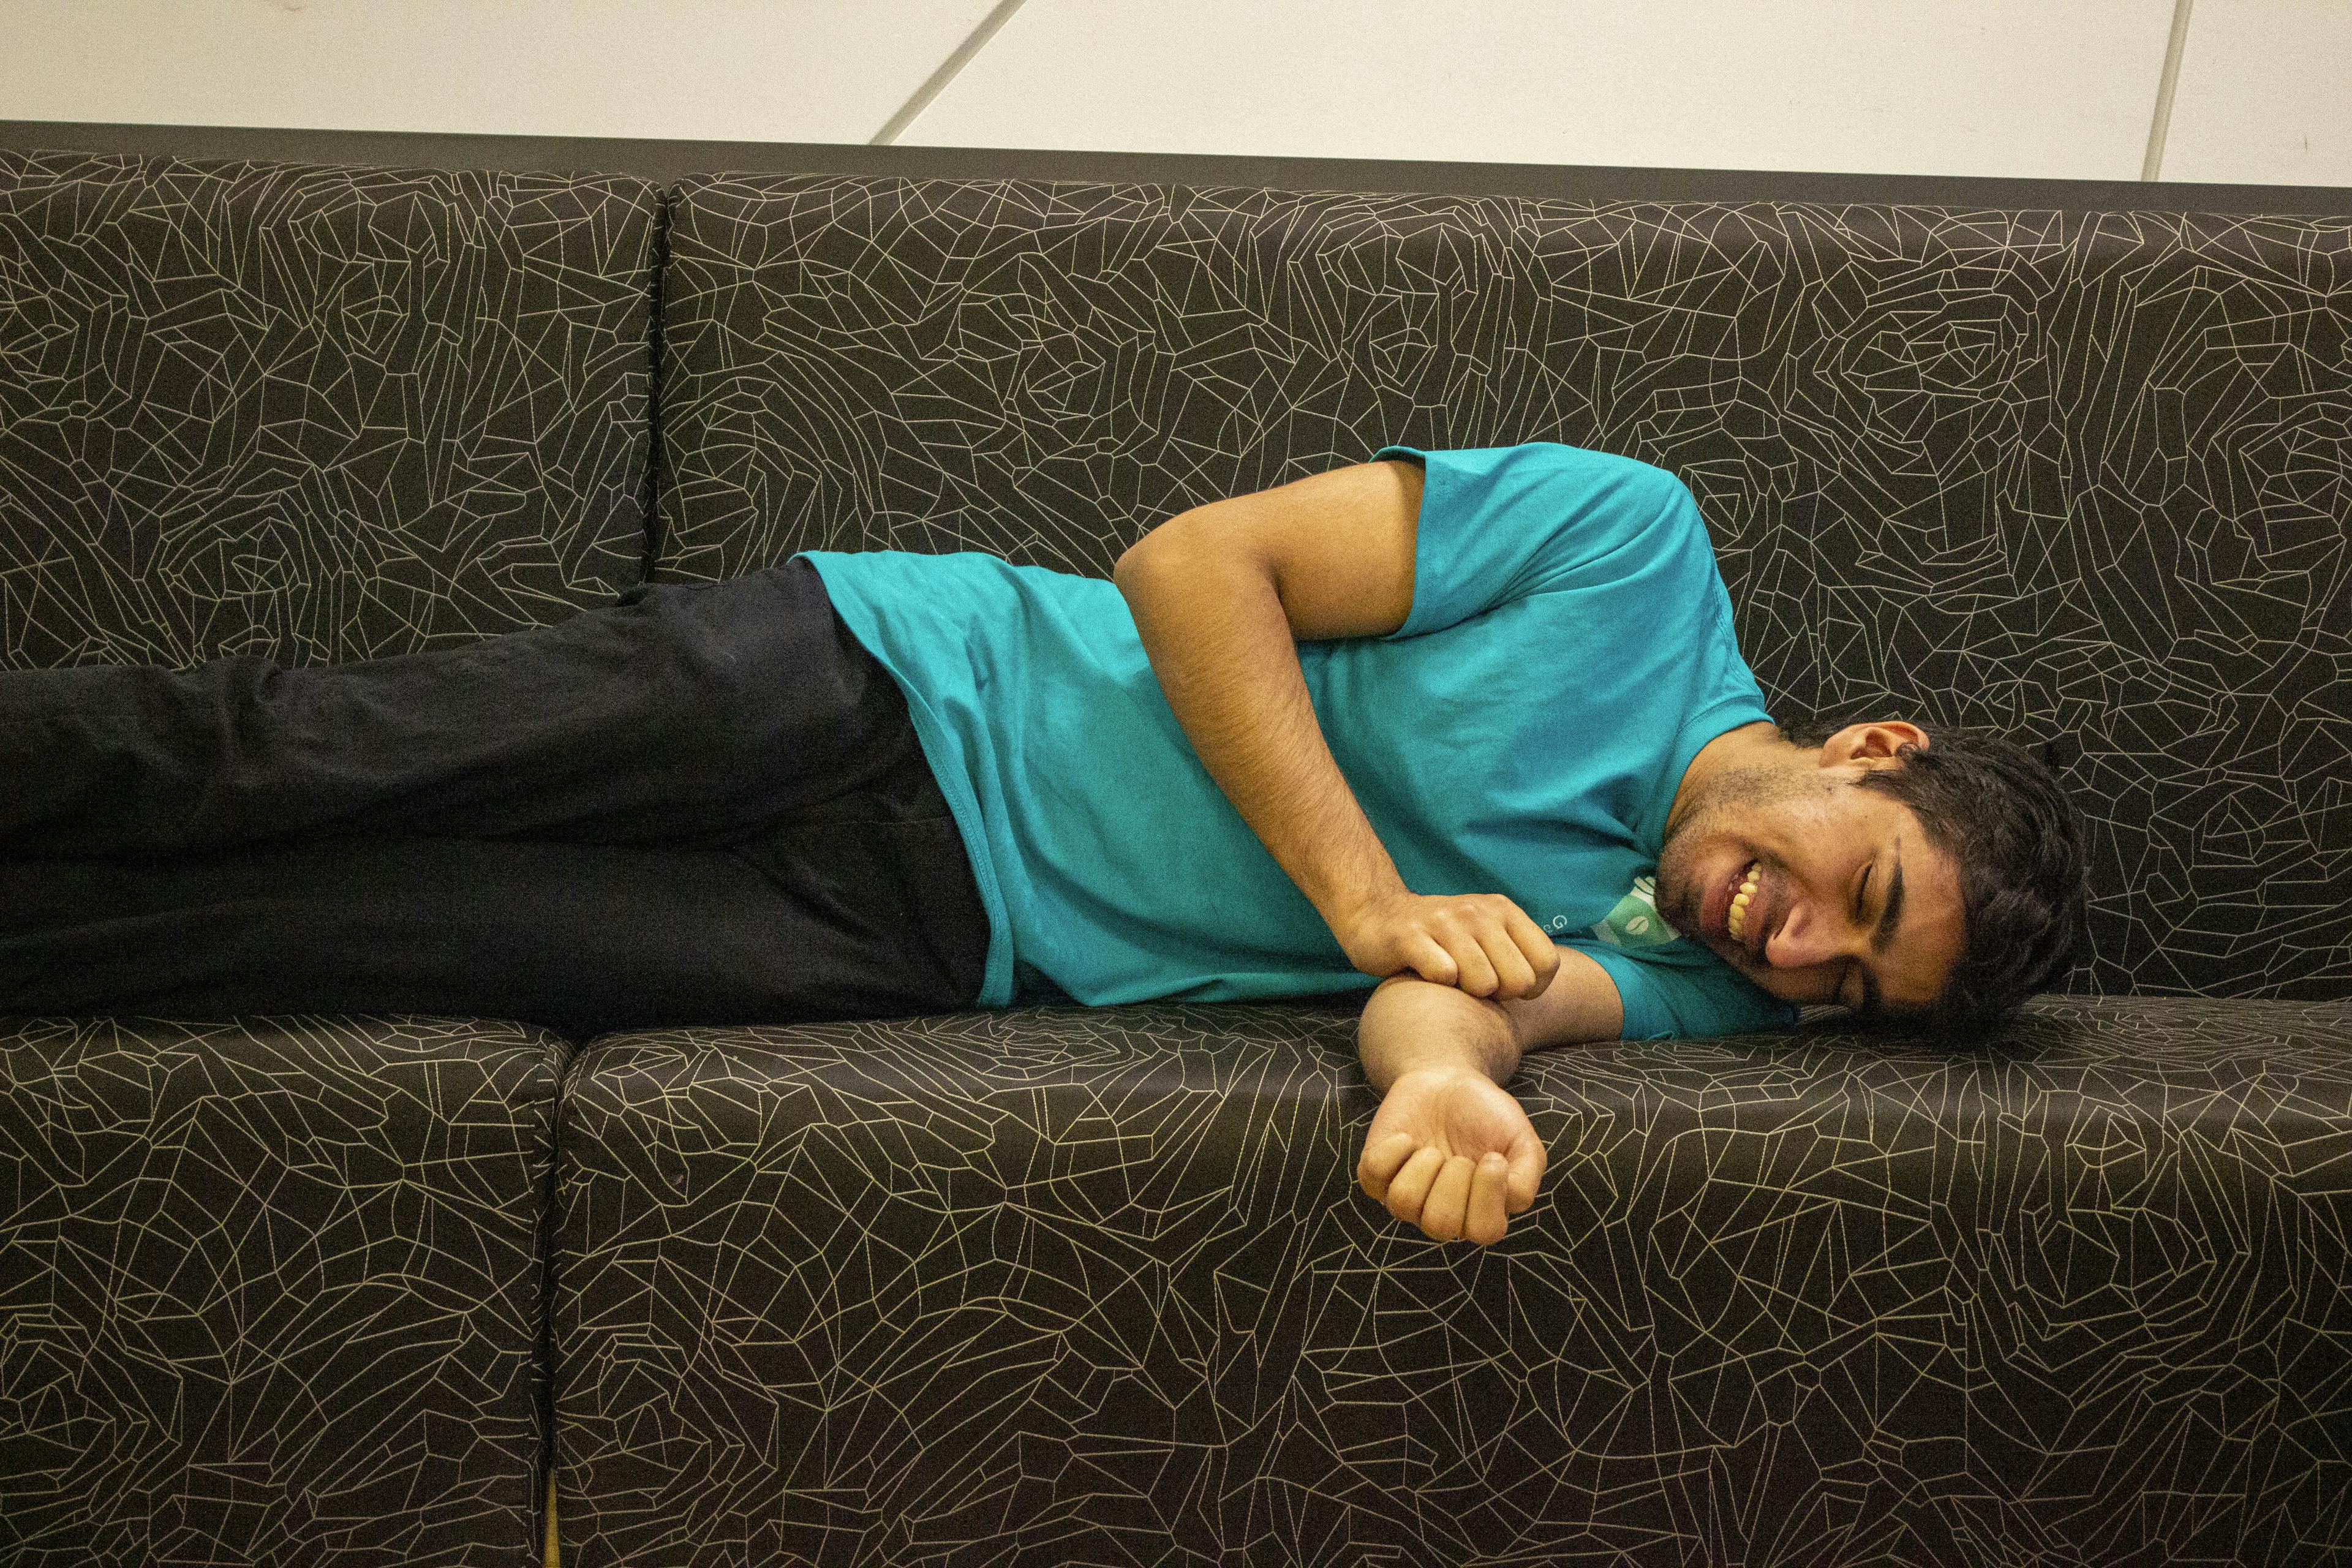 Daniyal laughing on a couch in their office space located at York University.